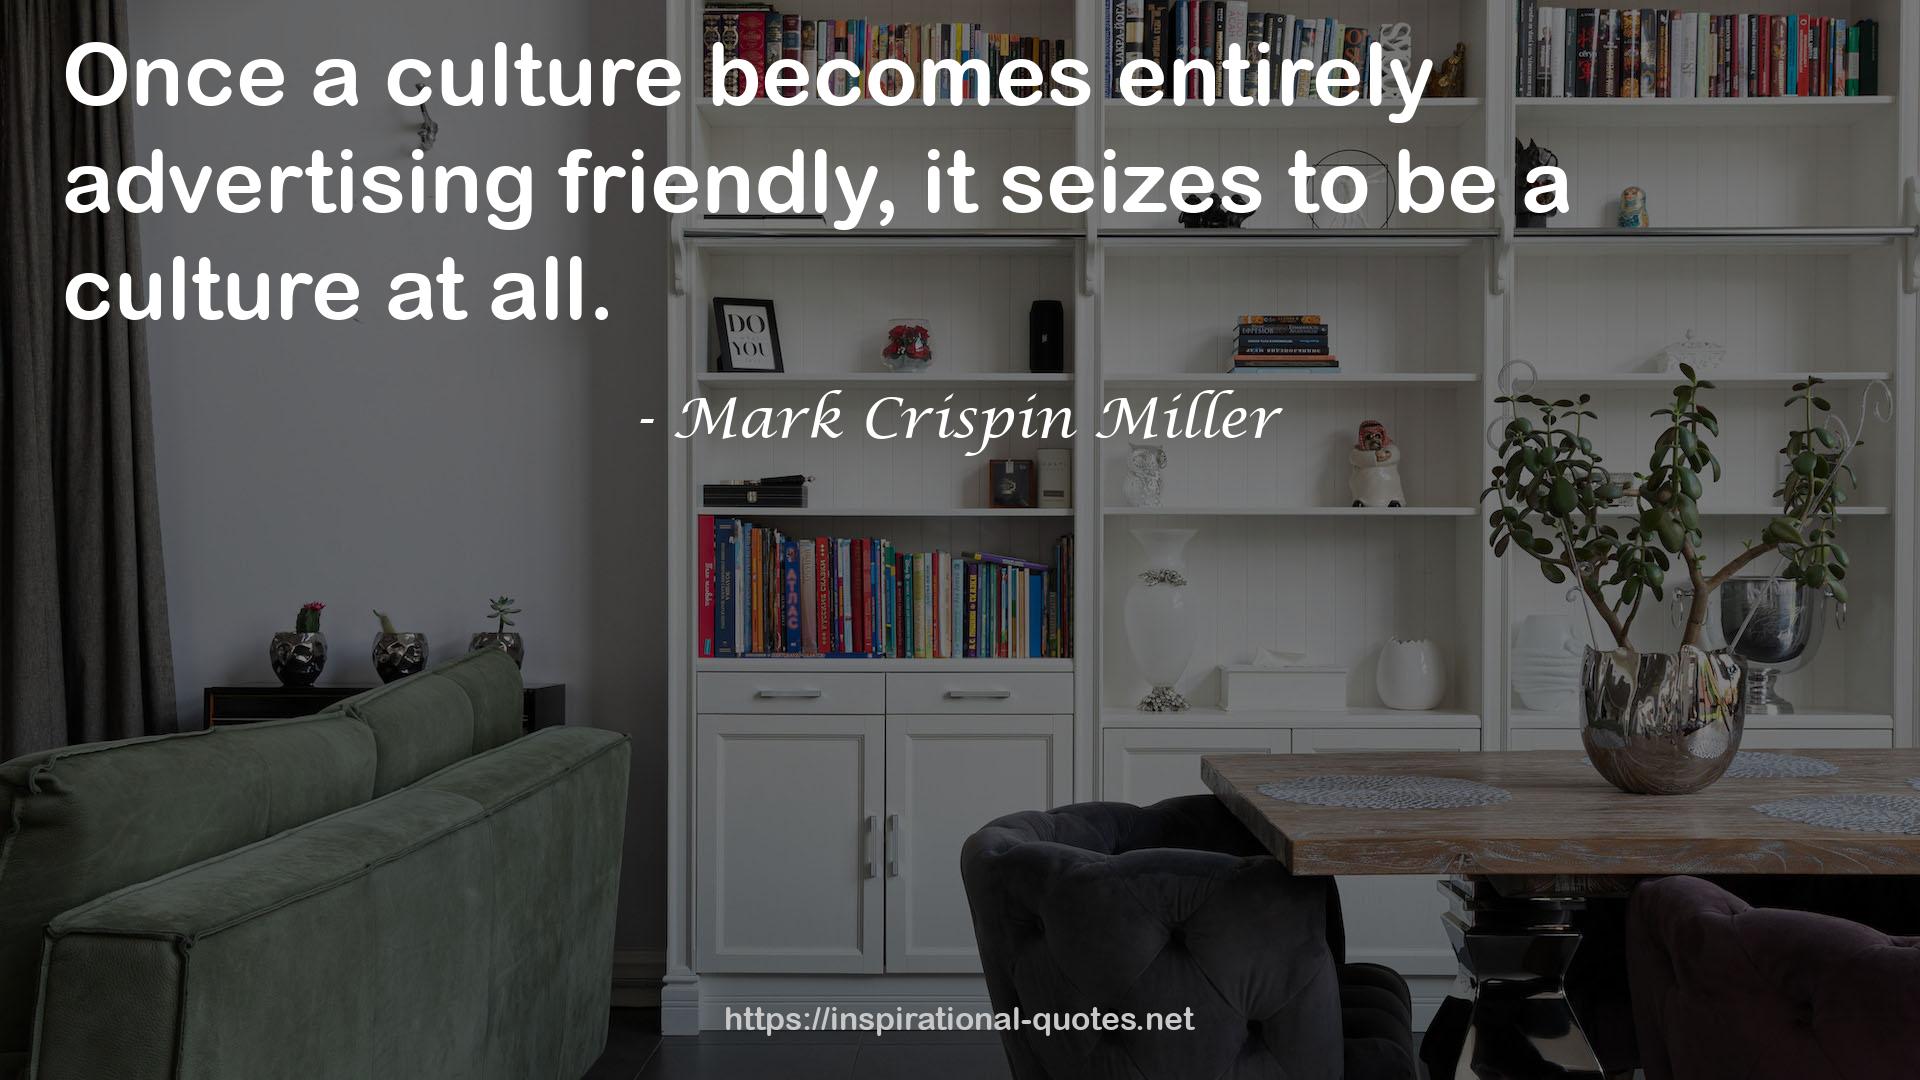 Mark Crispin Miller QUOTES